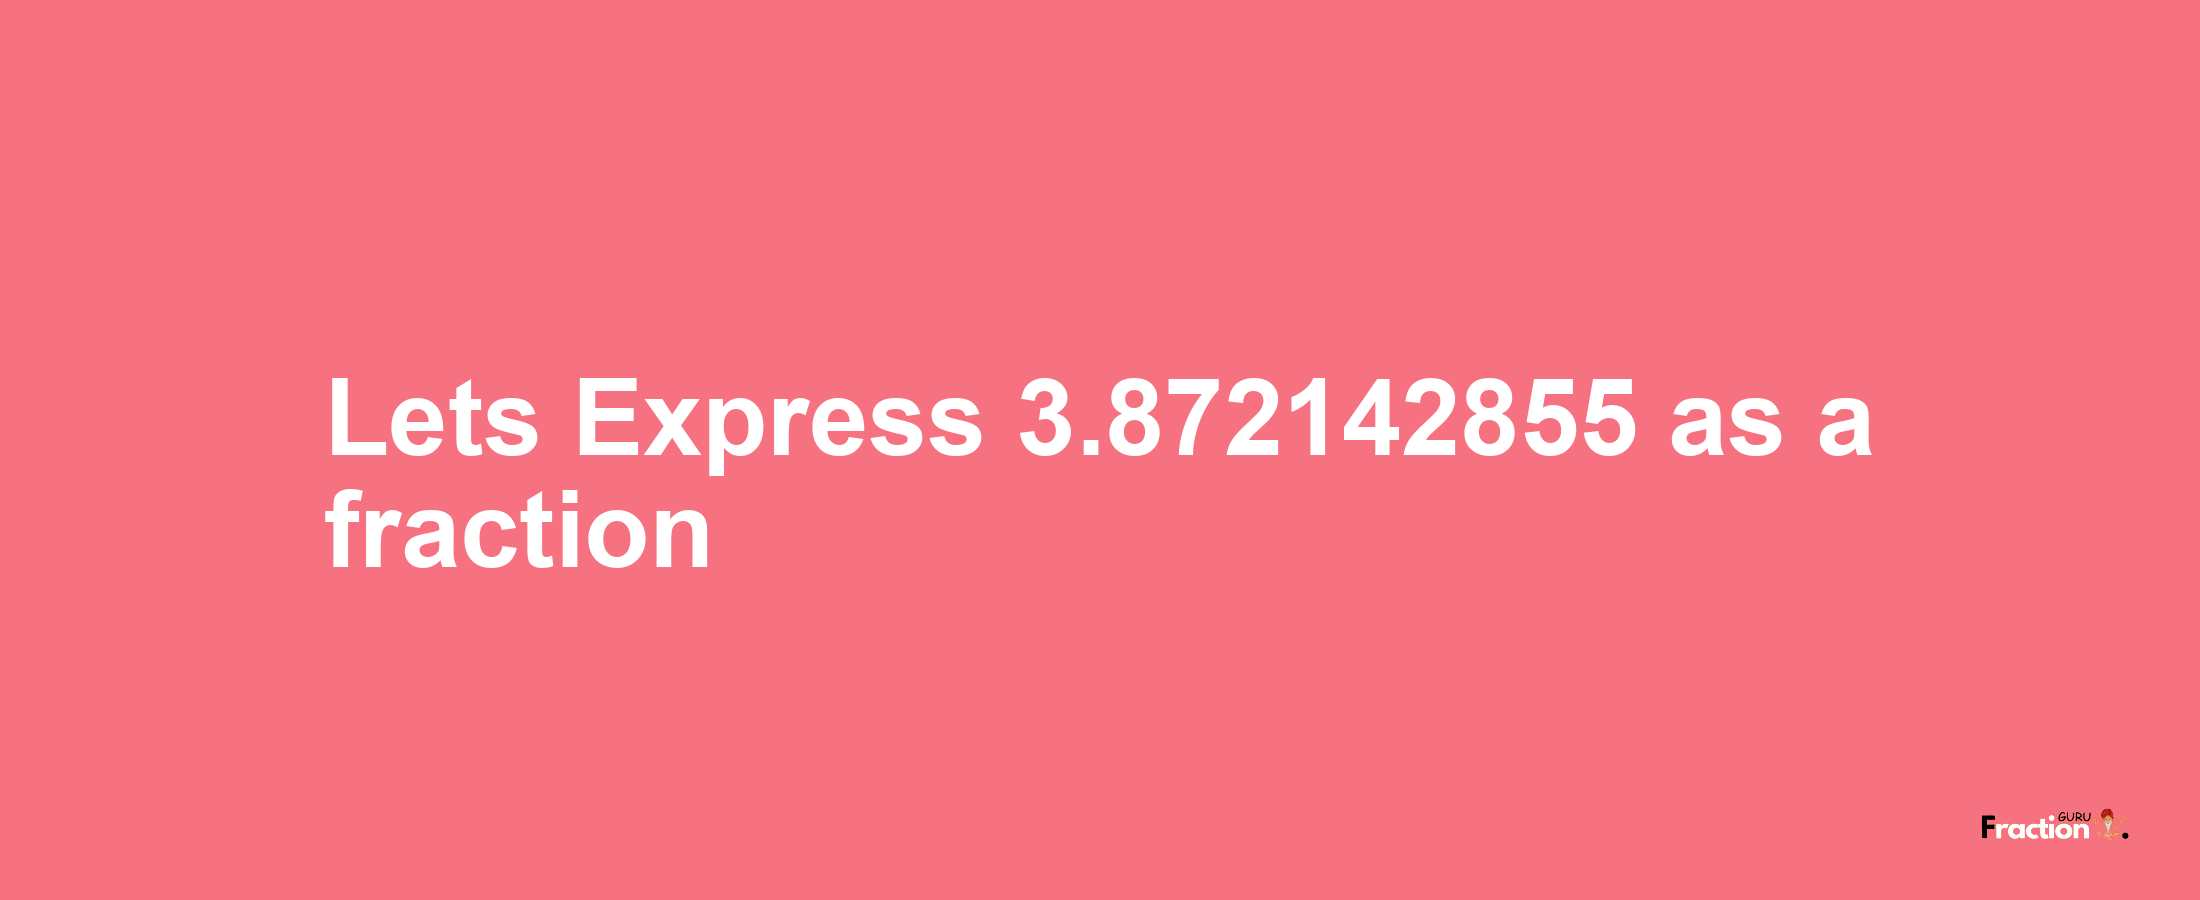 Lets Express 3.872142855 as afraction